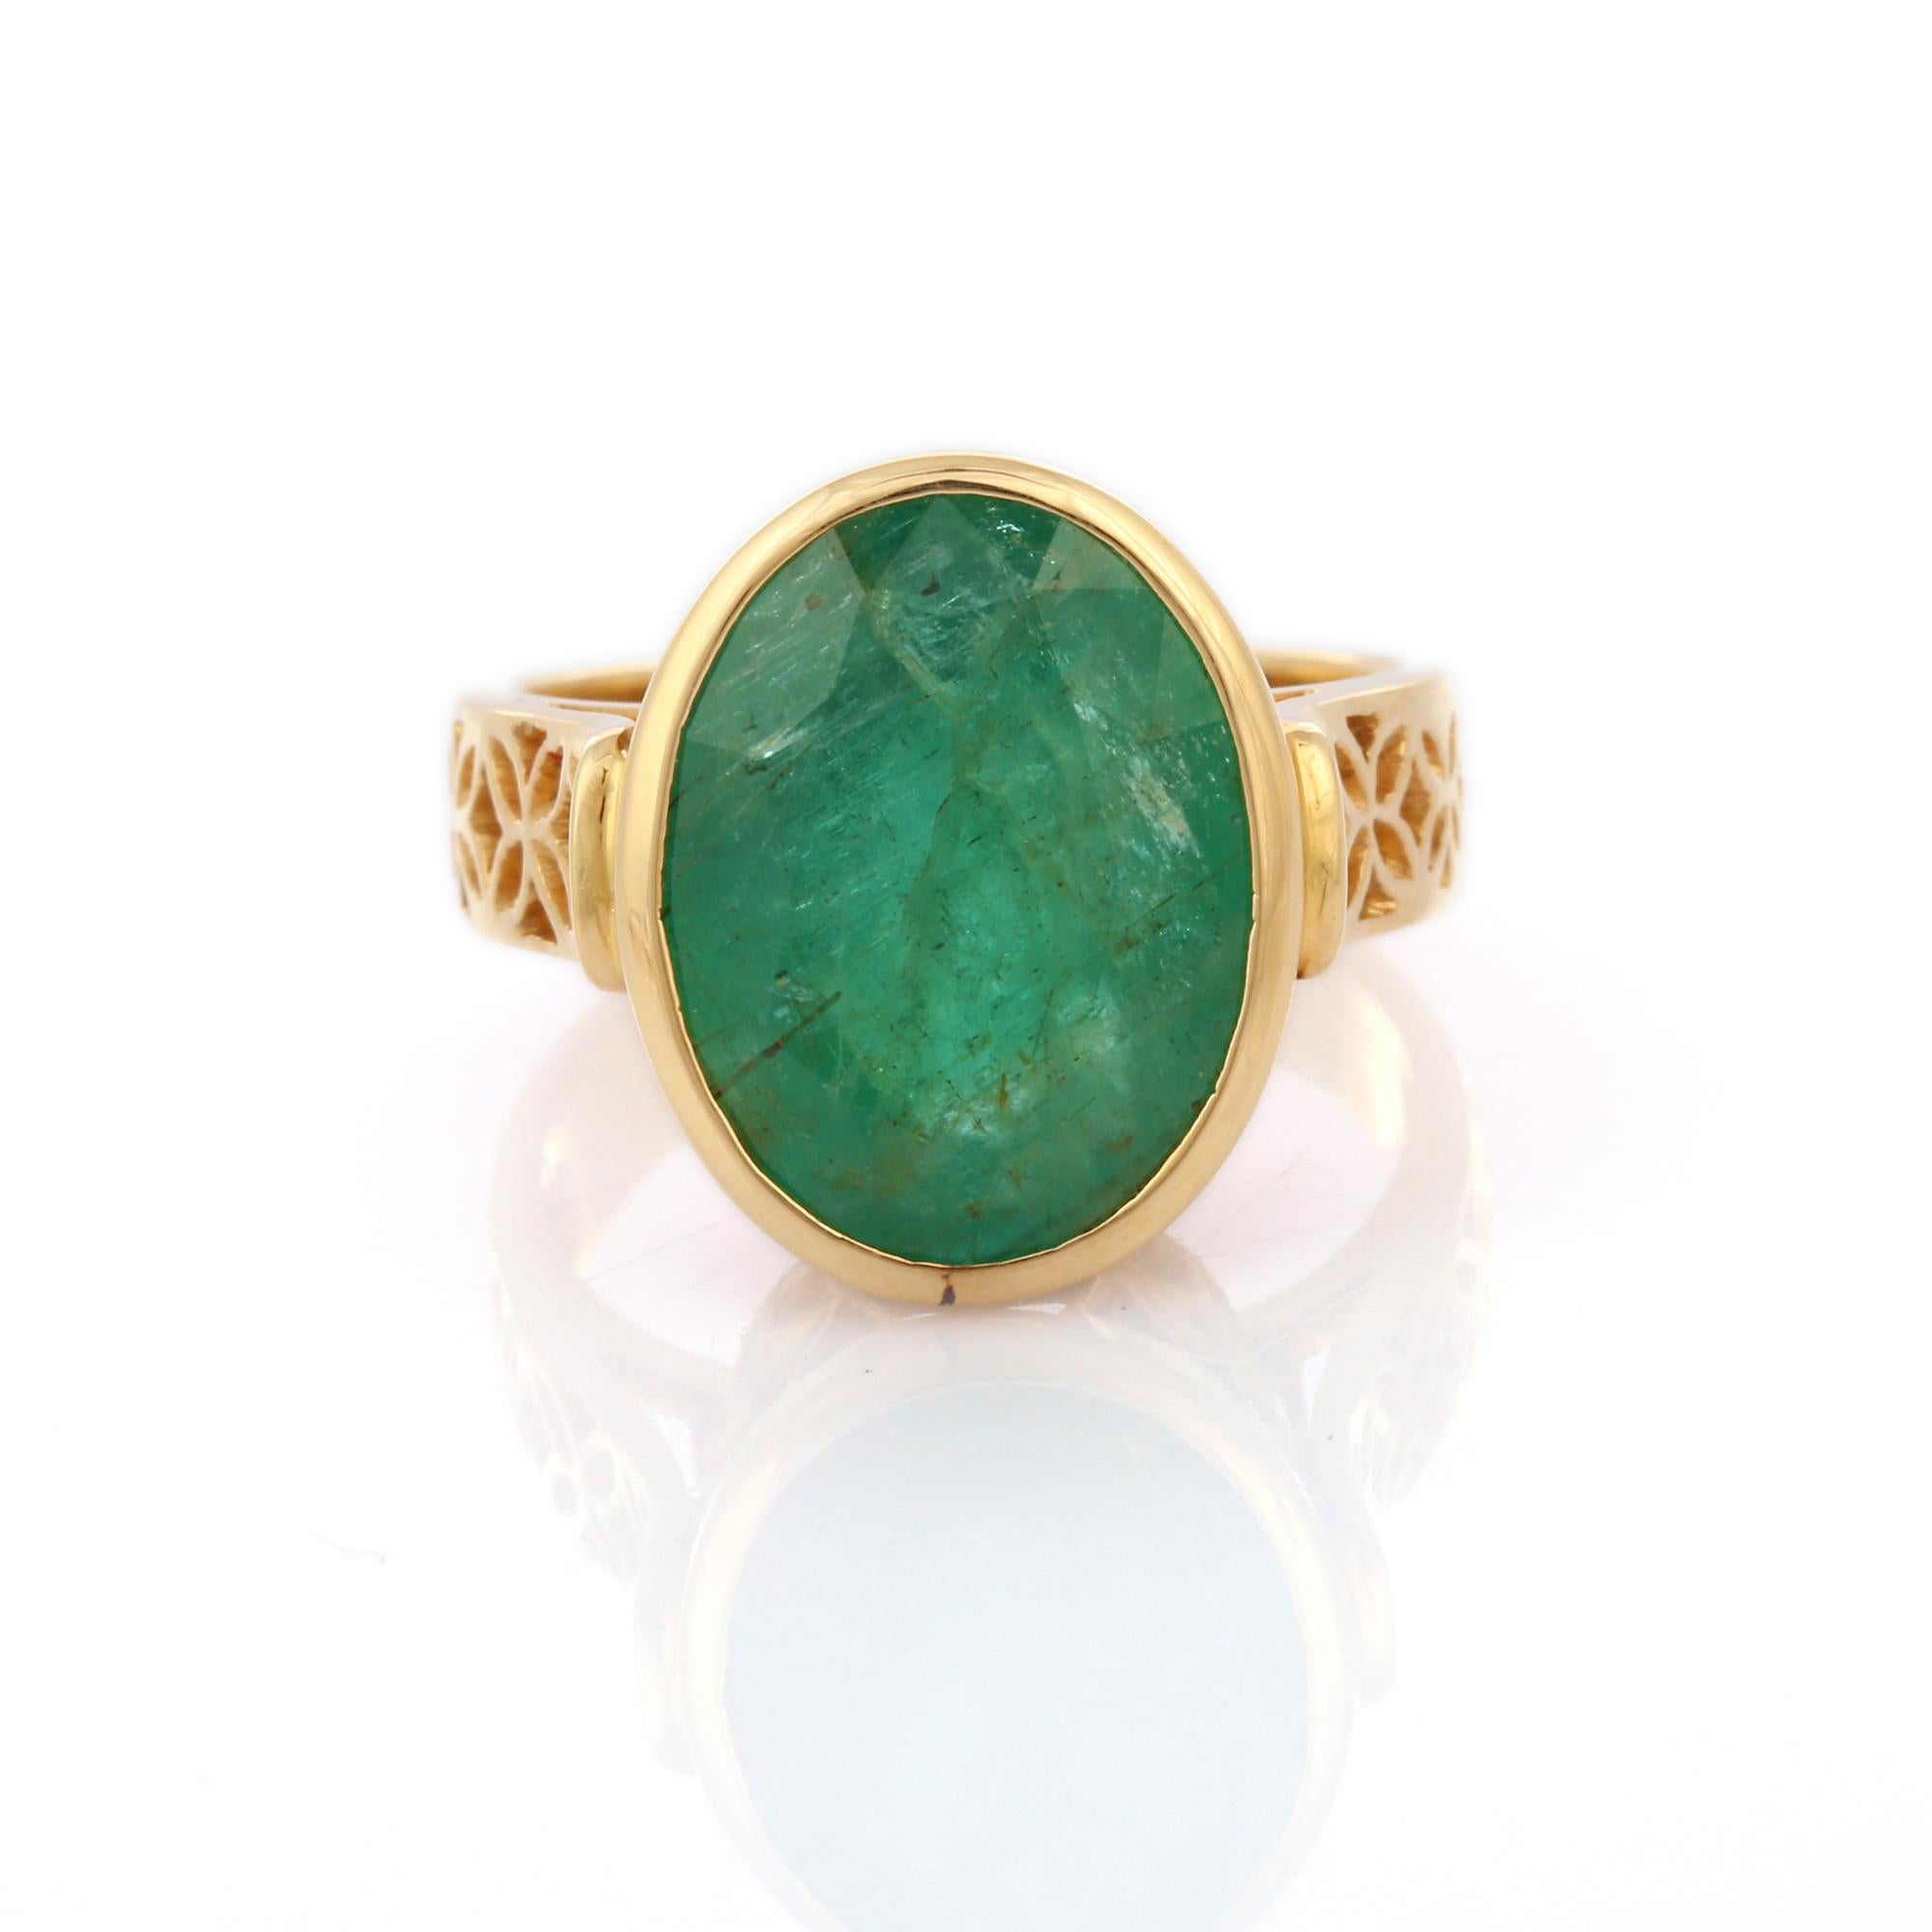 For Sale:  Natural Certified 7.76 Carats Emerald Ring in 18k Solid Yellow Gold 2